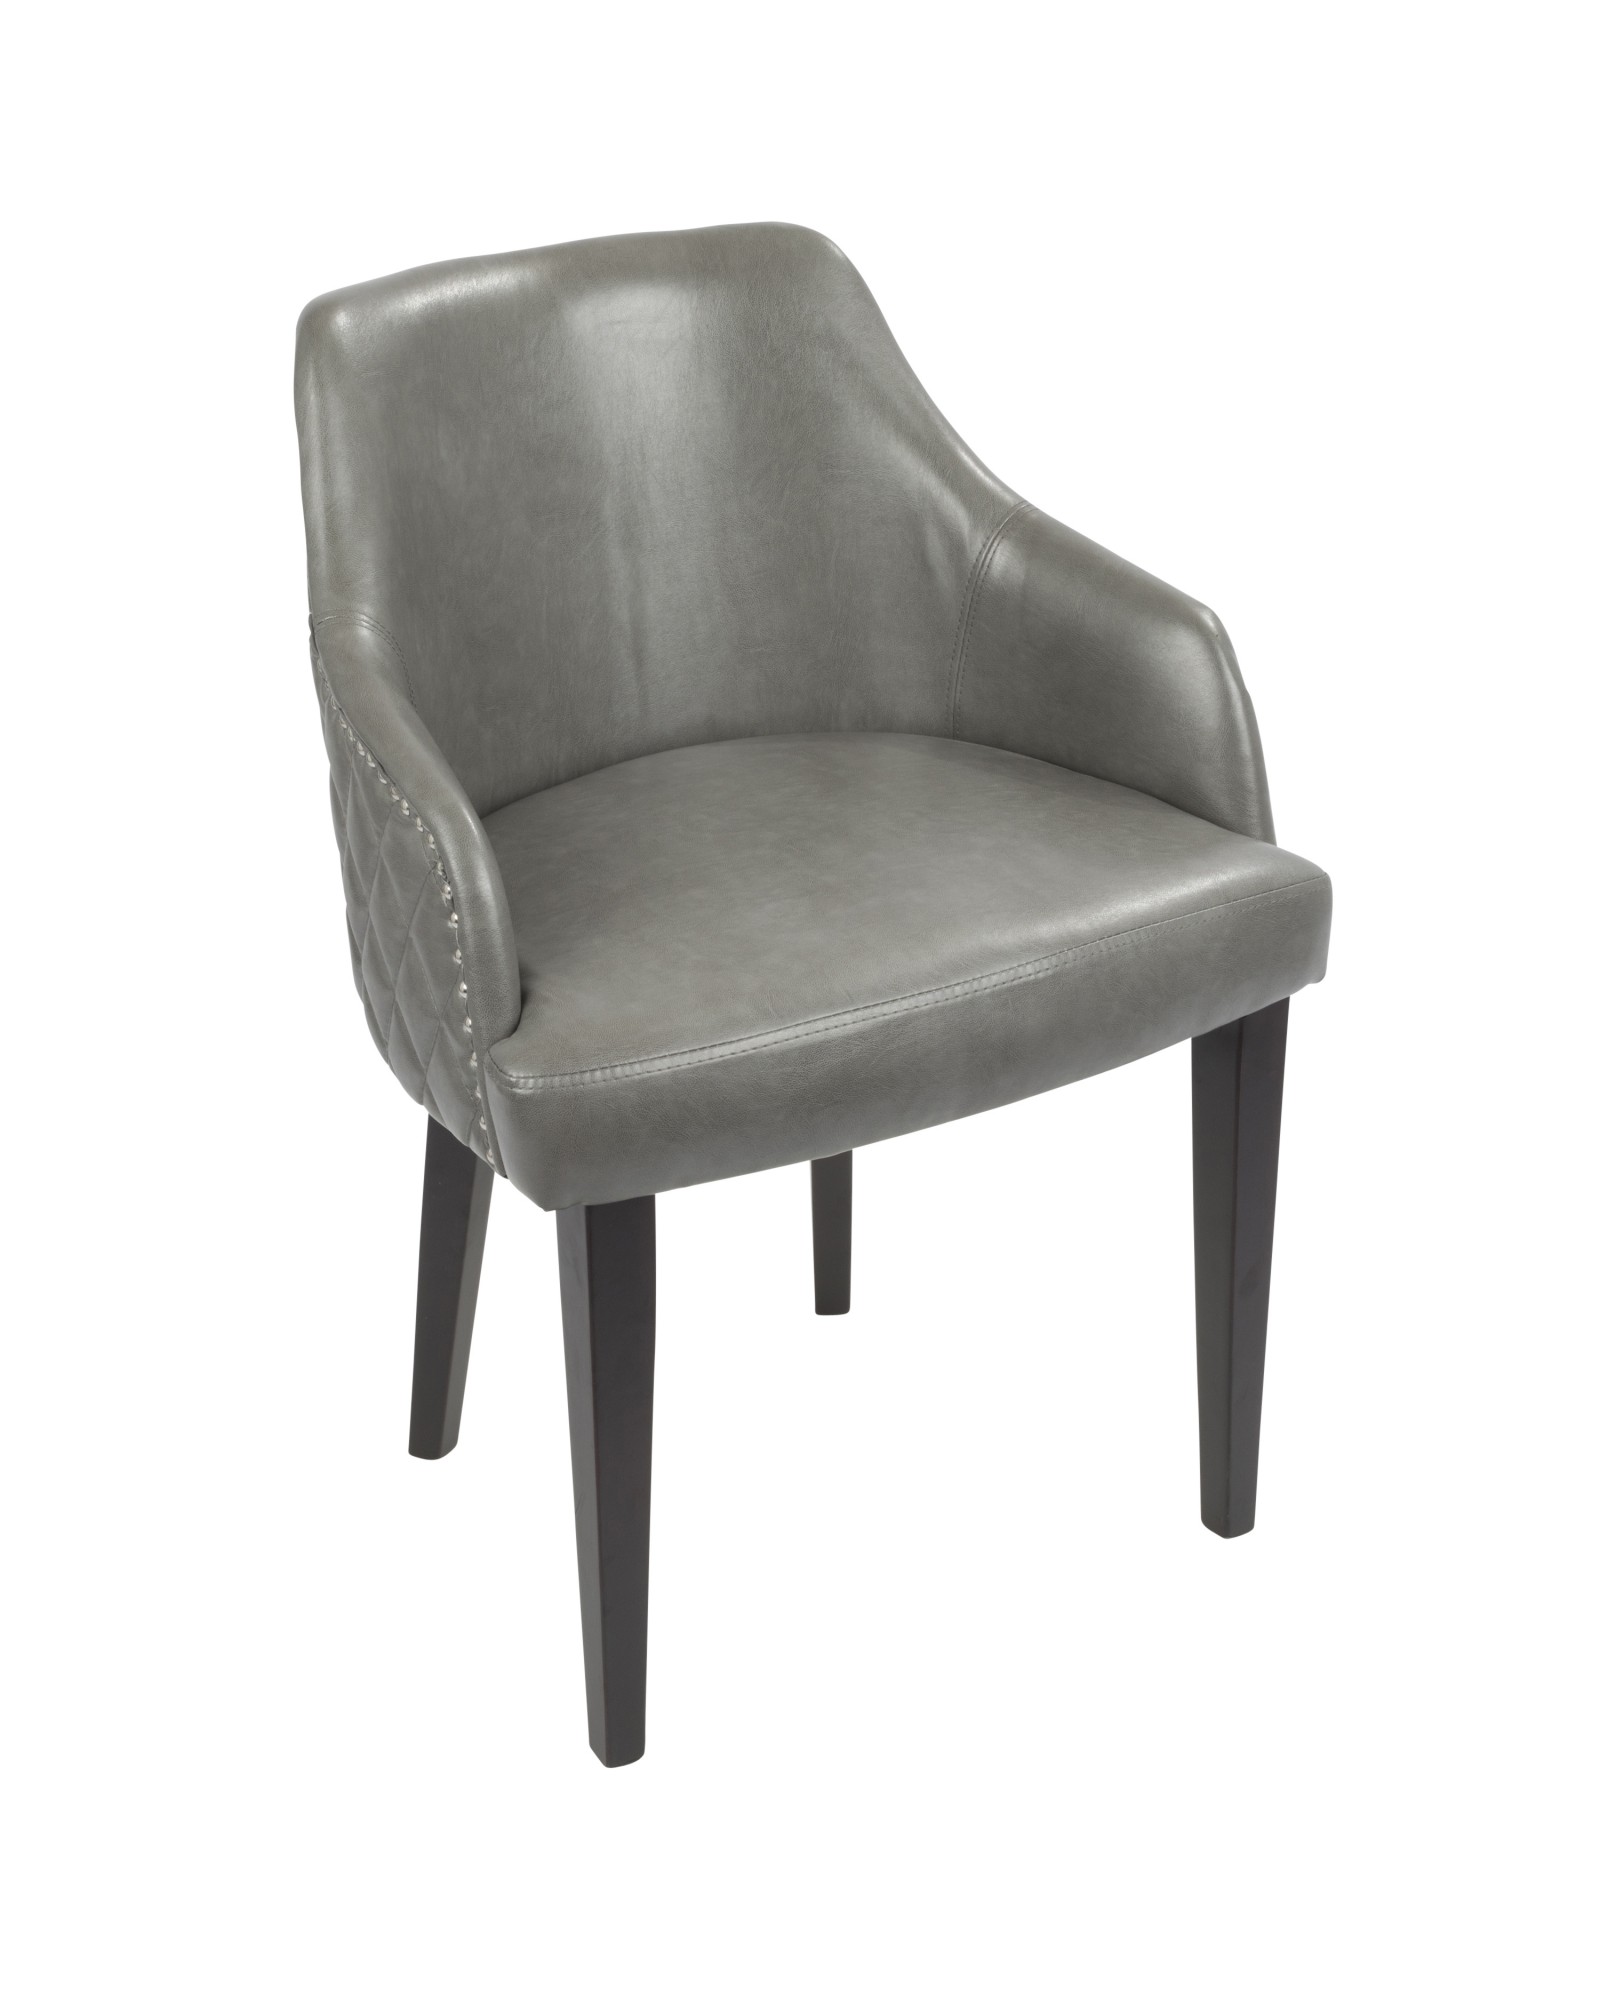 Esteban Contemporary Dining Chair with Chrome Studded Trim in Espresso with Grey Faux Leather - Set of 2